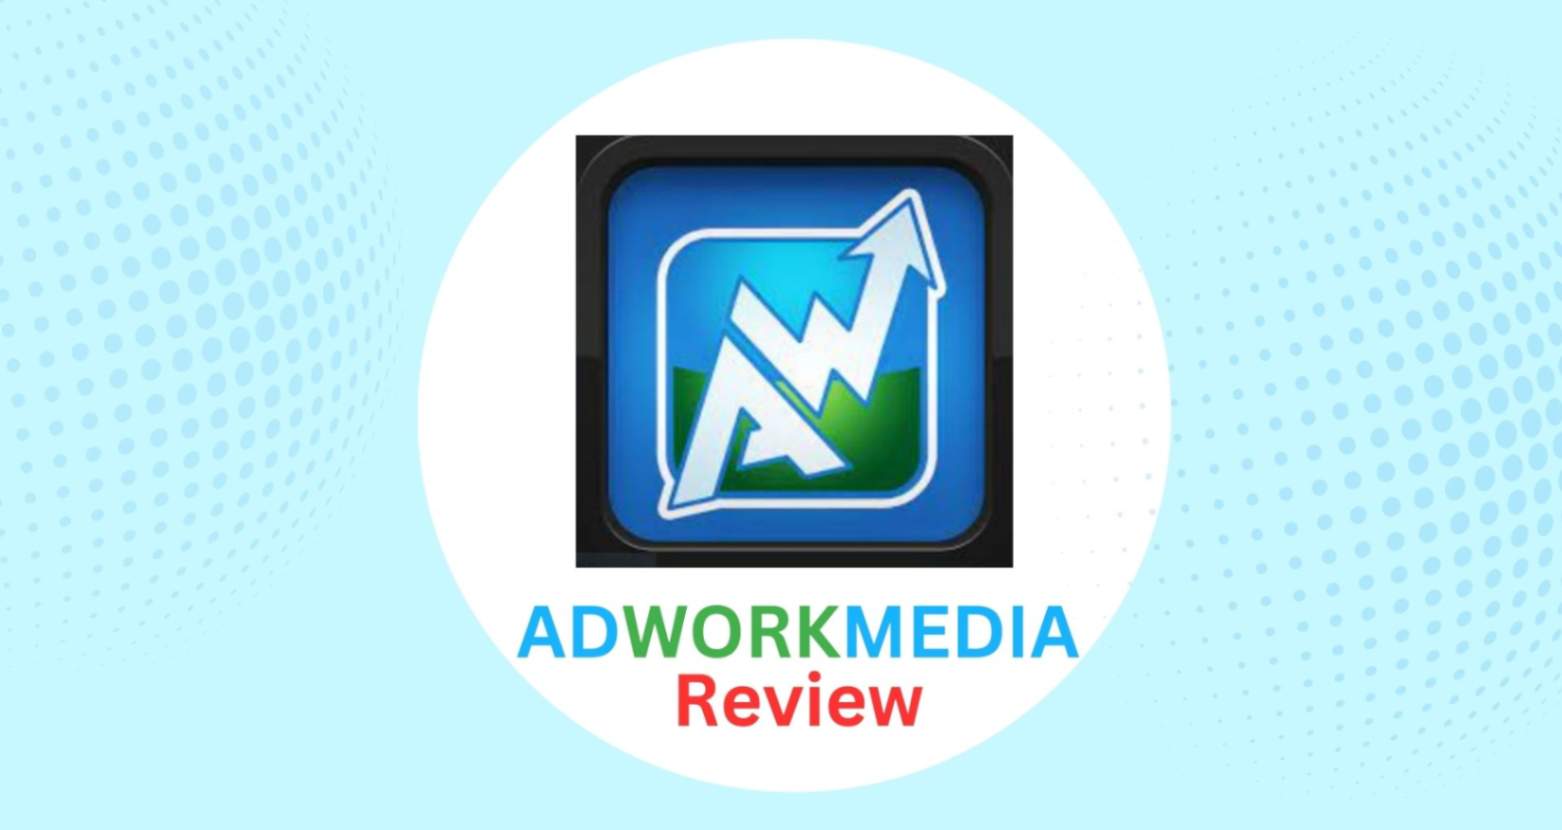 adworkmedia review featured image